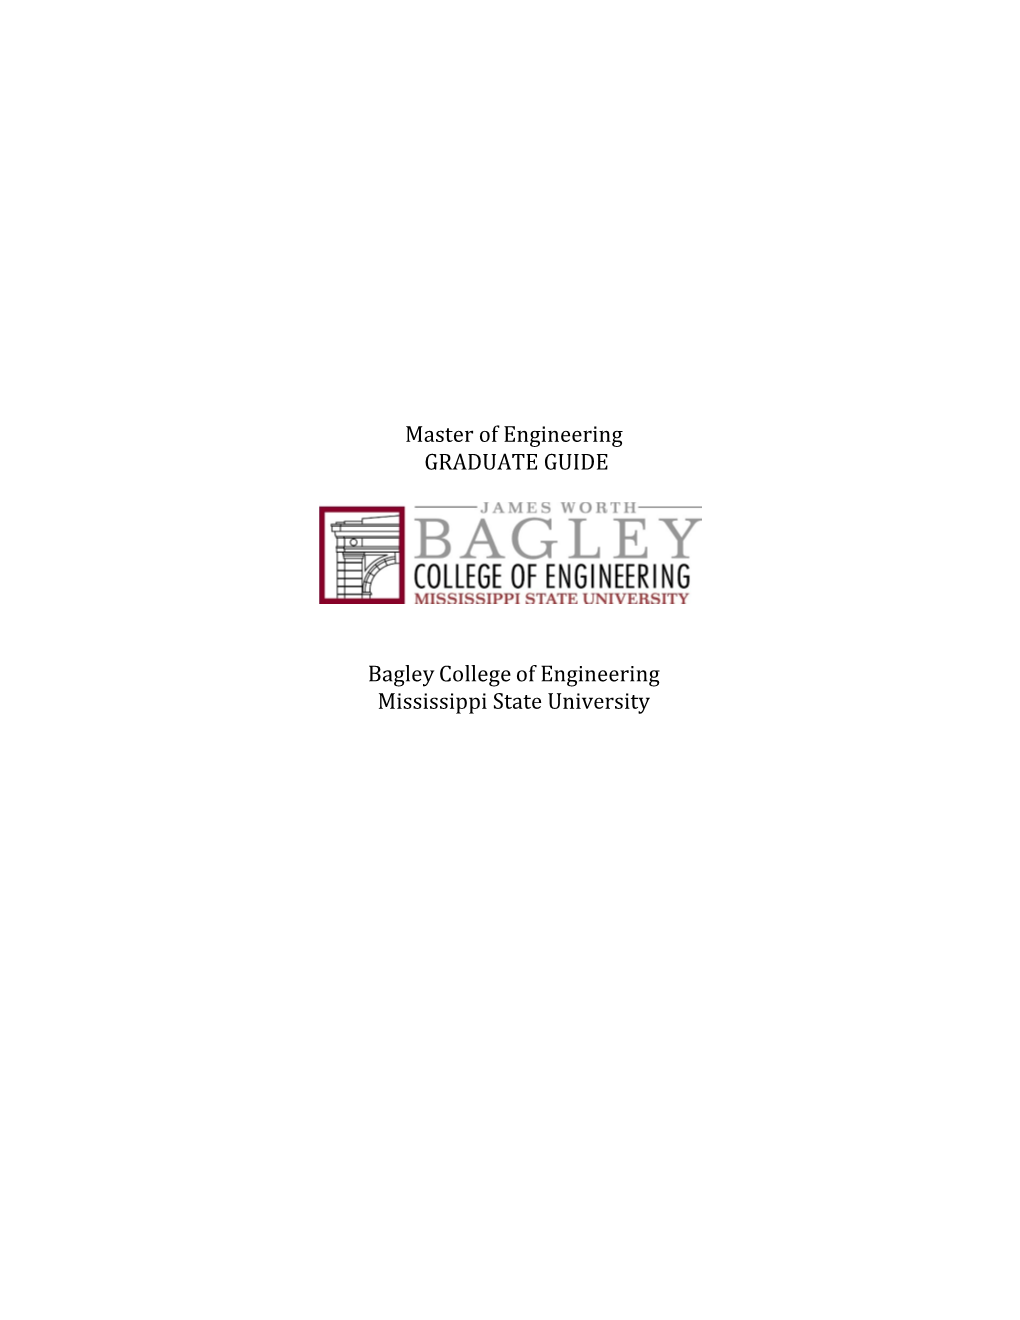 Master of Engineering GRADUATE GUIDE Bagley College Of